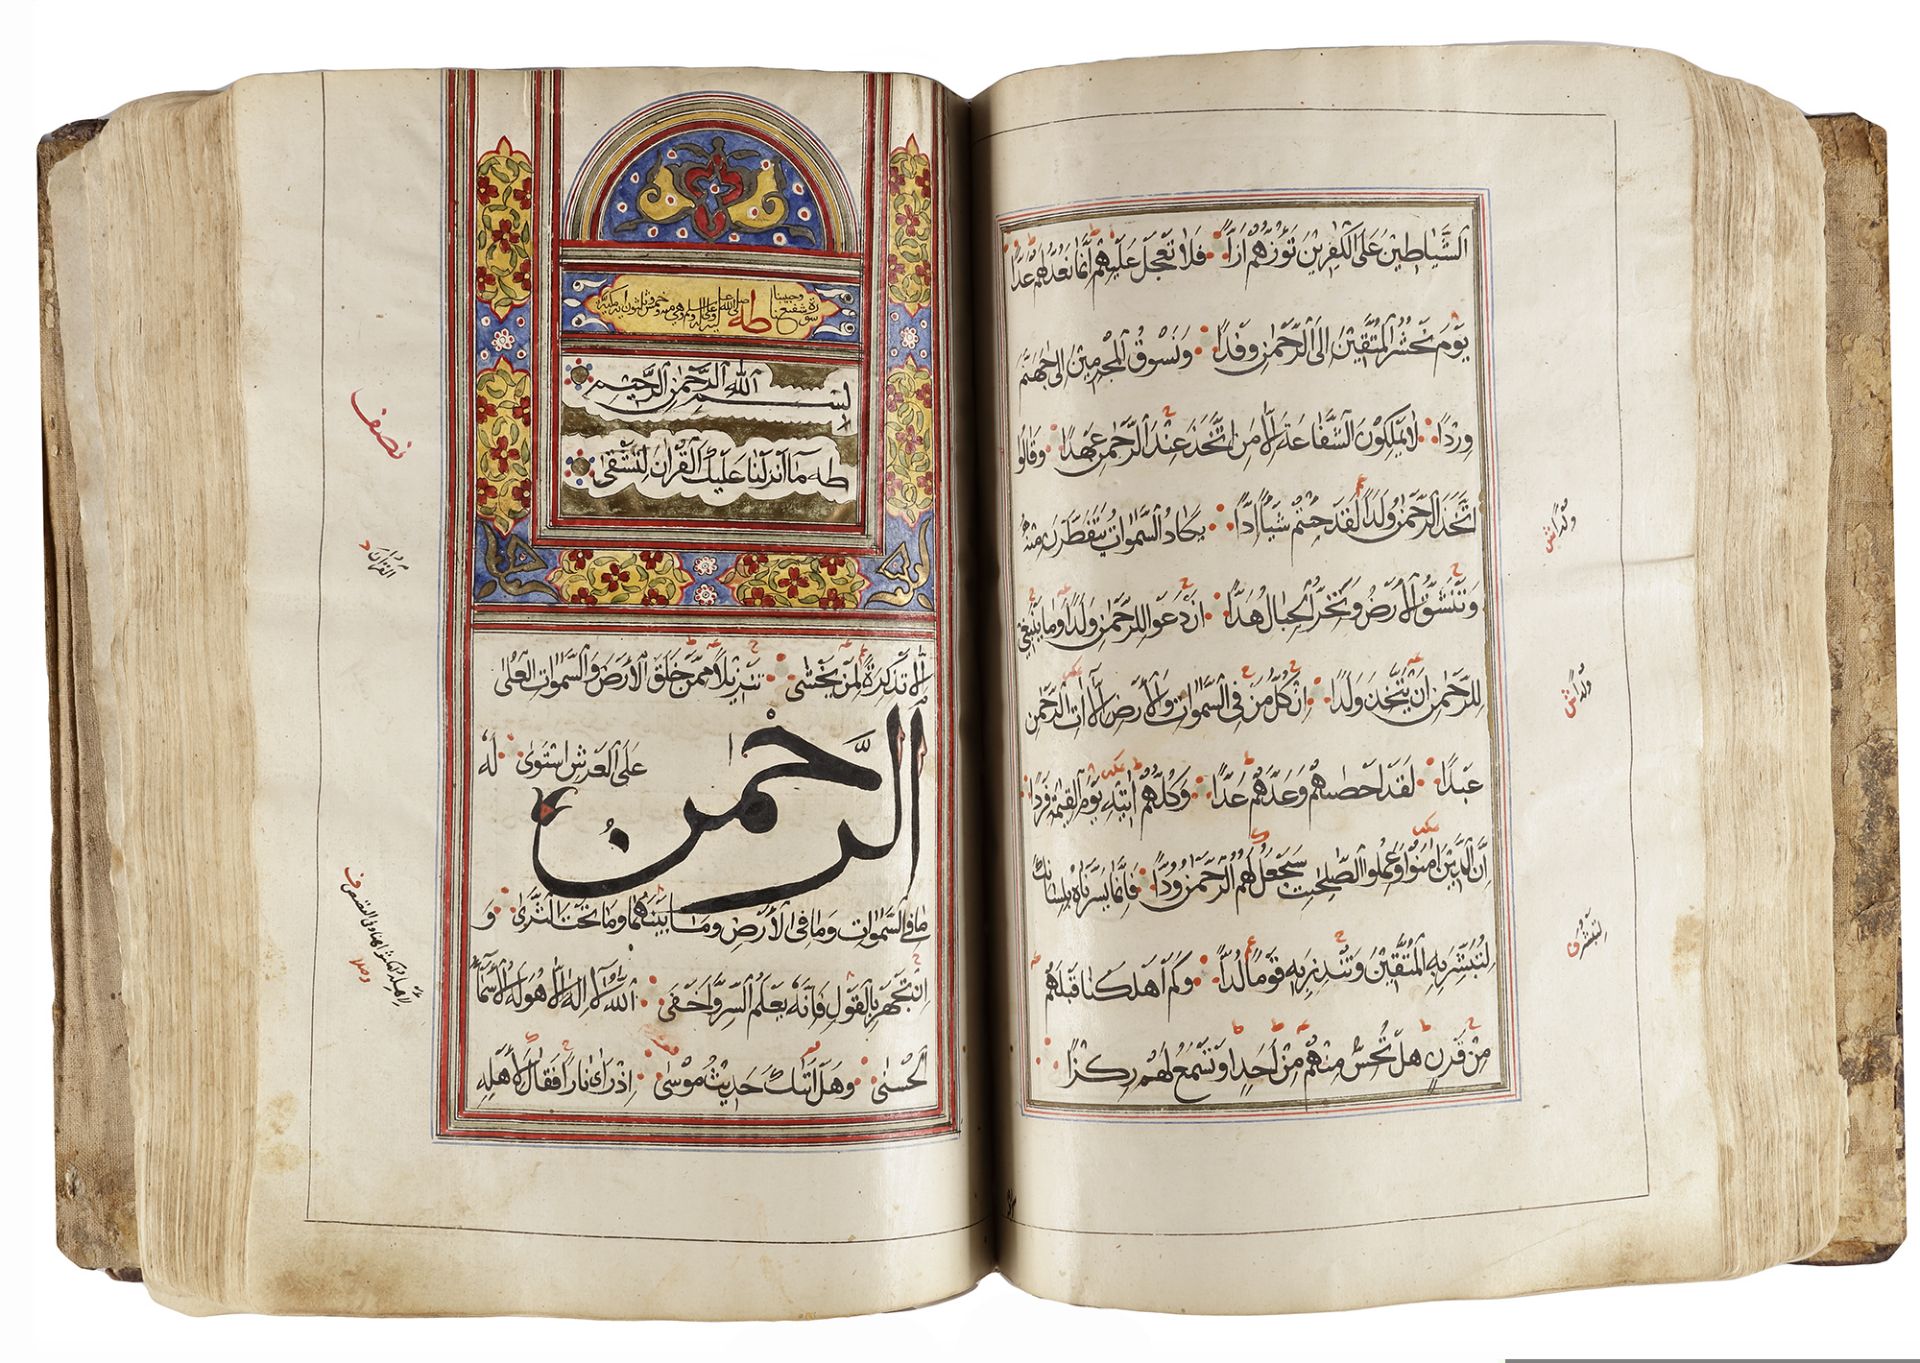 AN ILLUMINATED QURAN, YEMEN, BY AHMED QASEM IBN ISMAIL IN 1035 AH/1626 AD - Image 16 of 18